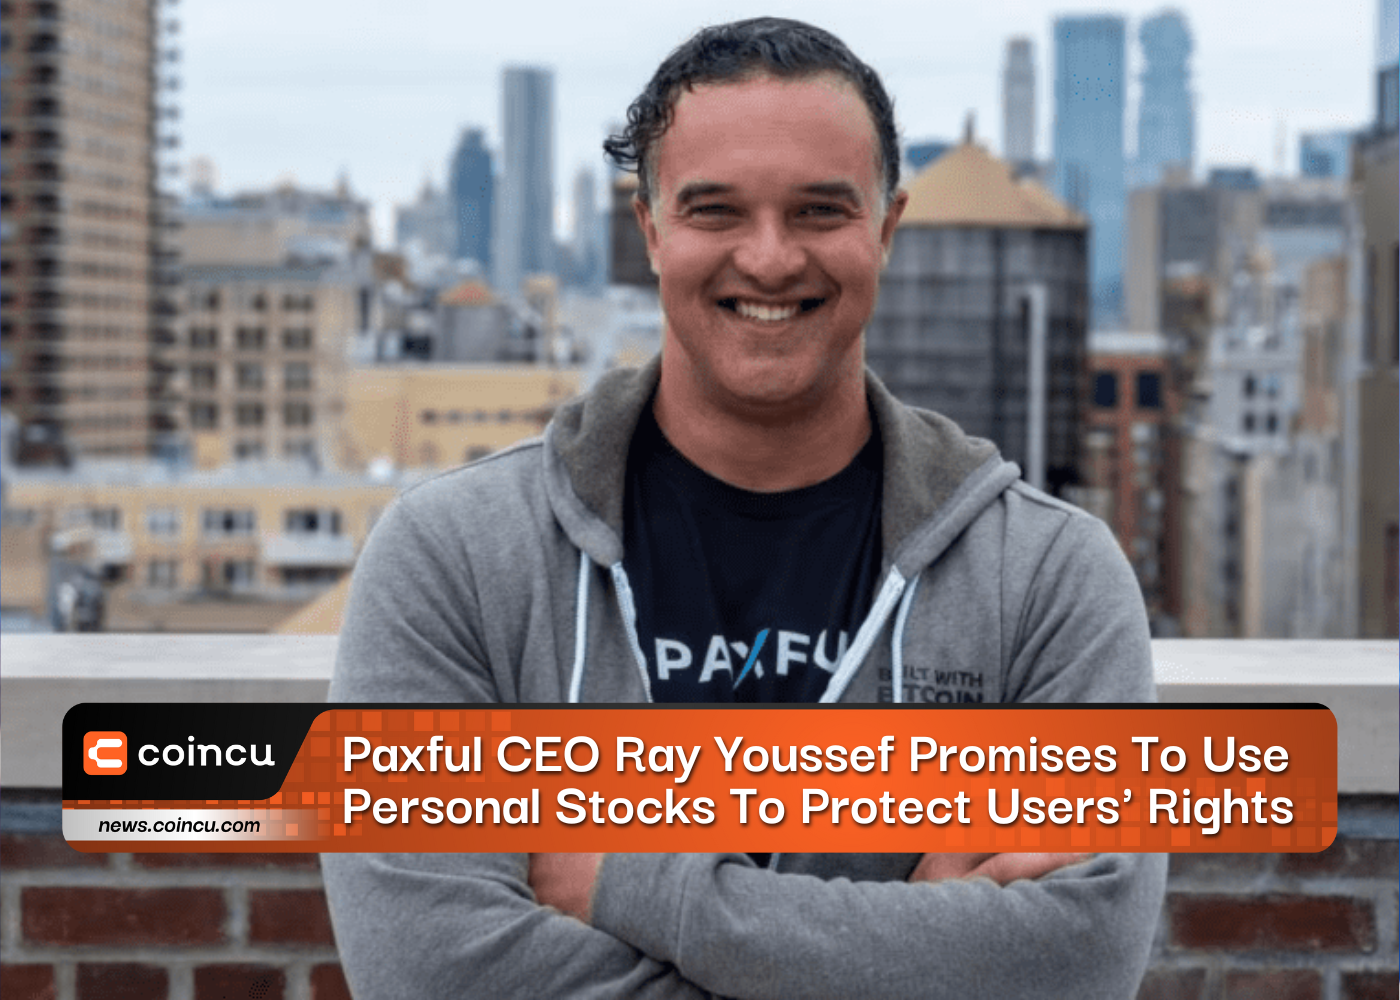 Paxful CEO Ray Youssef Promises To Use Personal Stocks To Protect Users' Rights